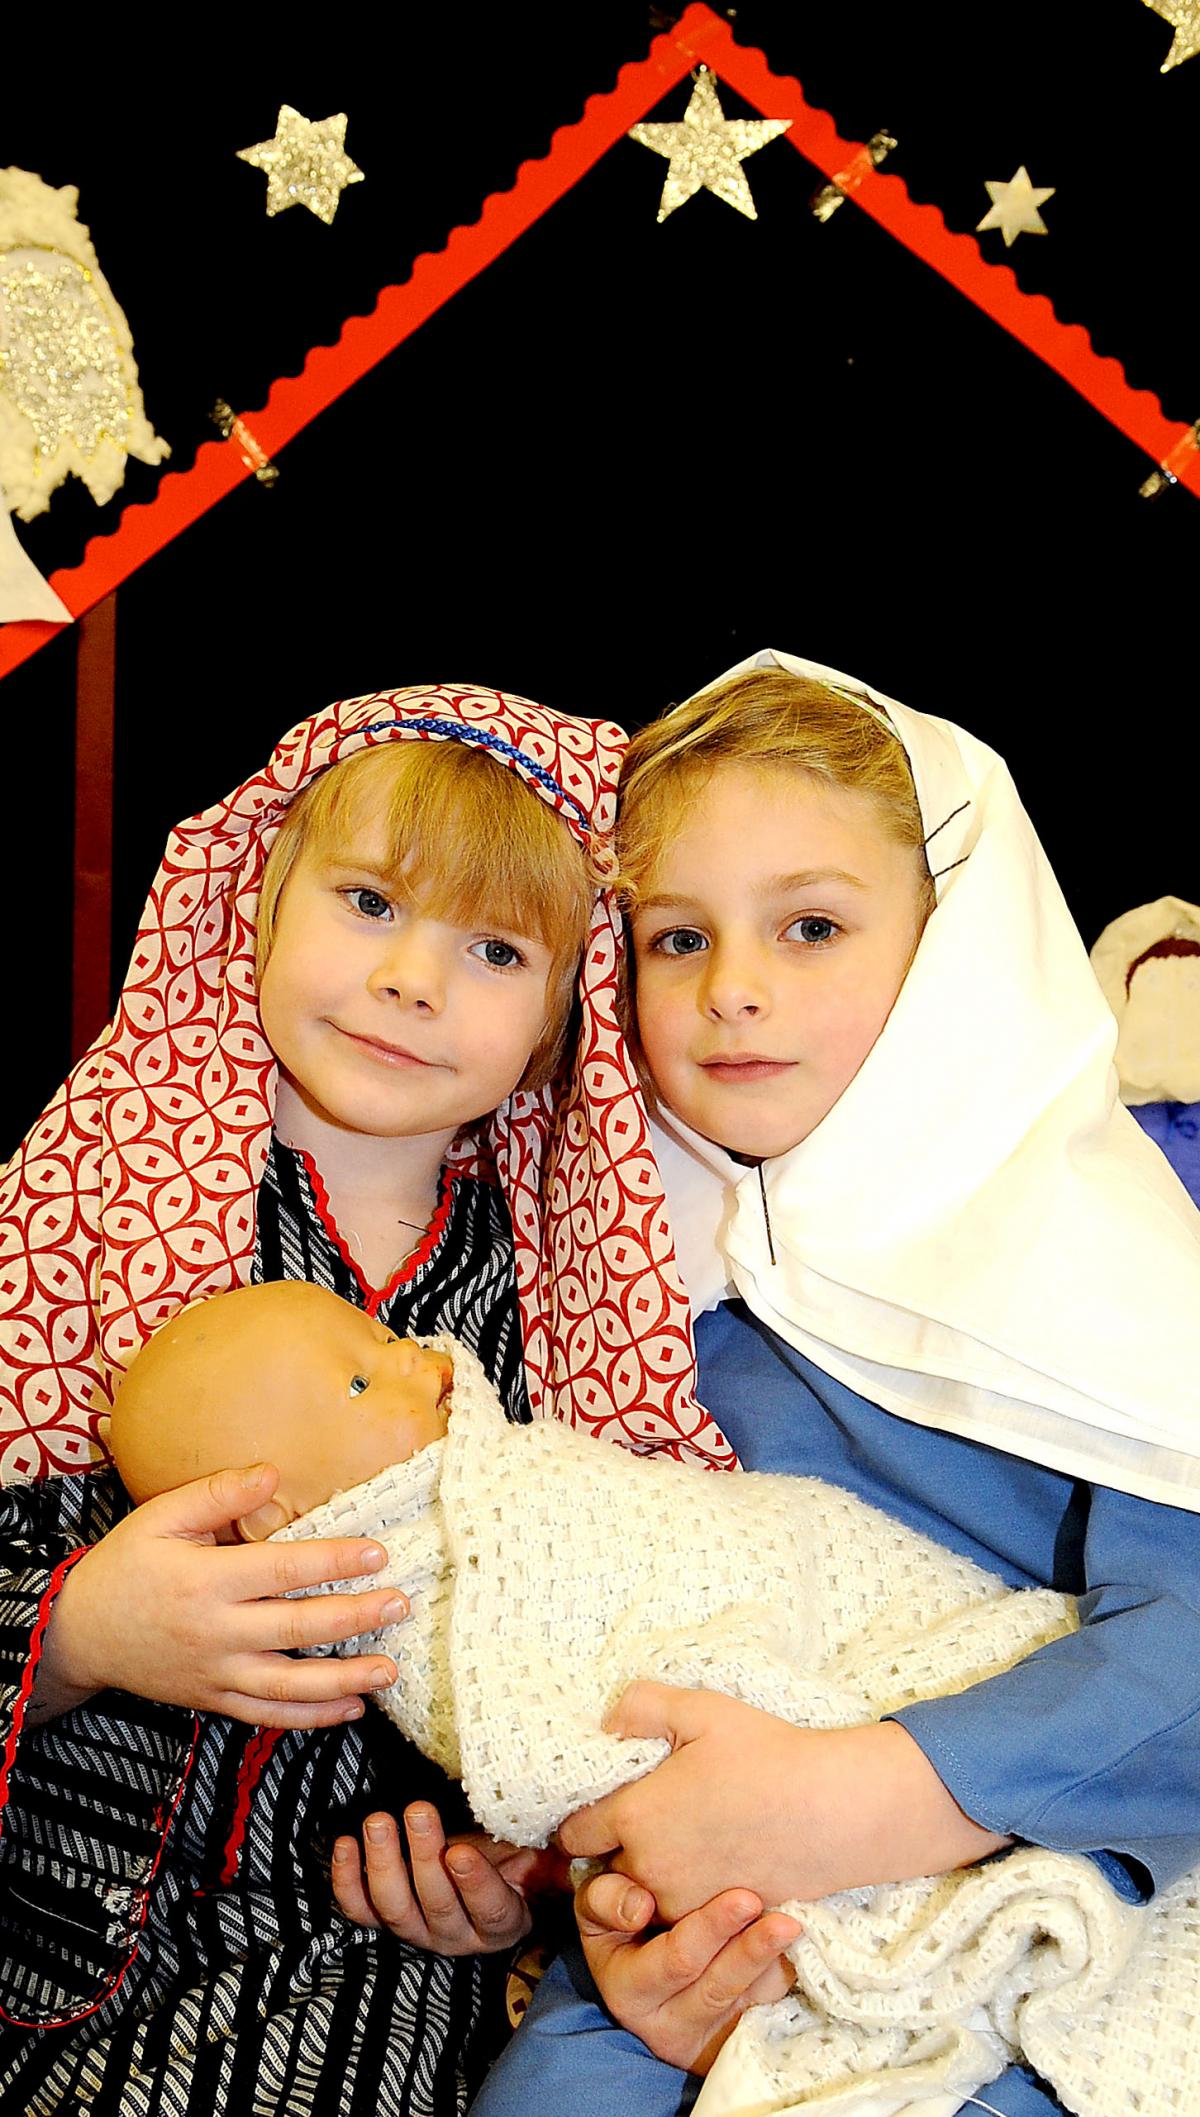 Richard Brown as Joseph and Lottie Carter as Mary